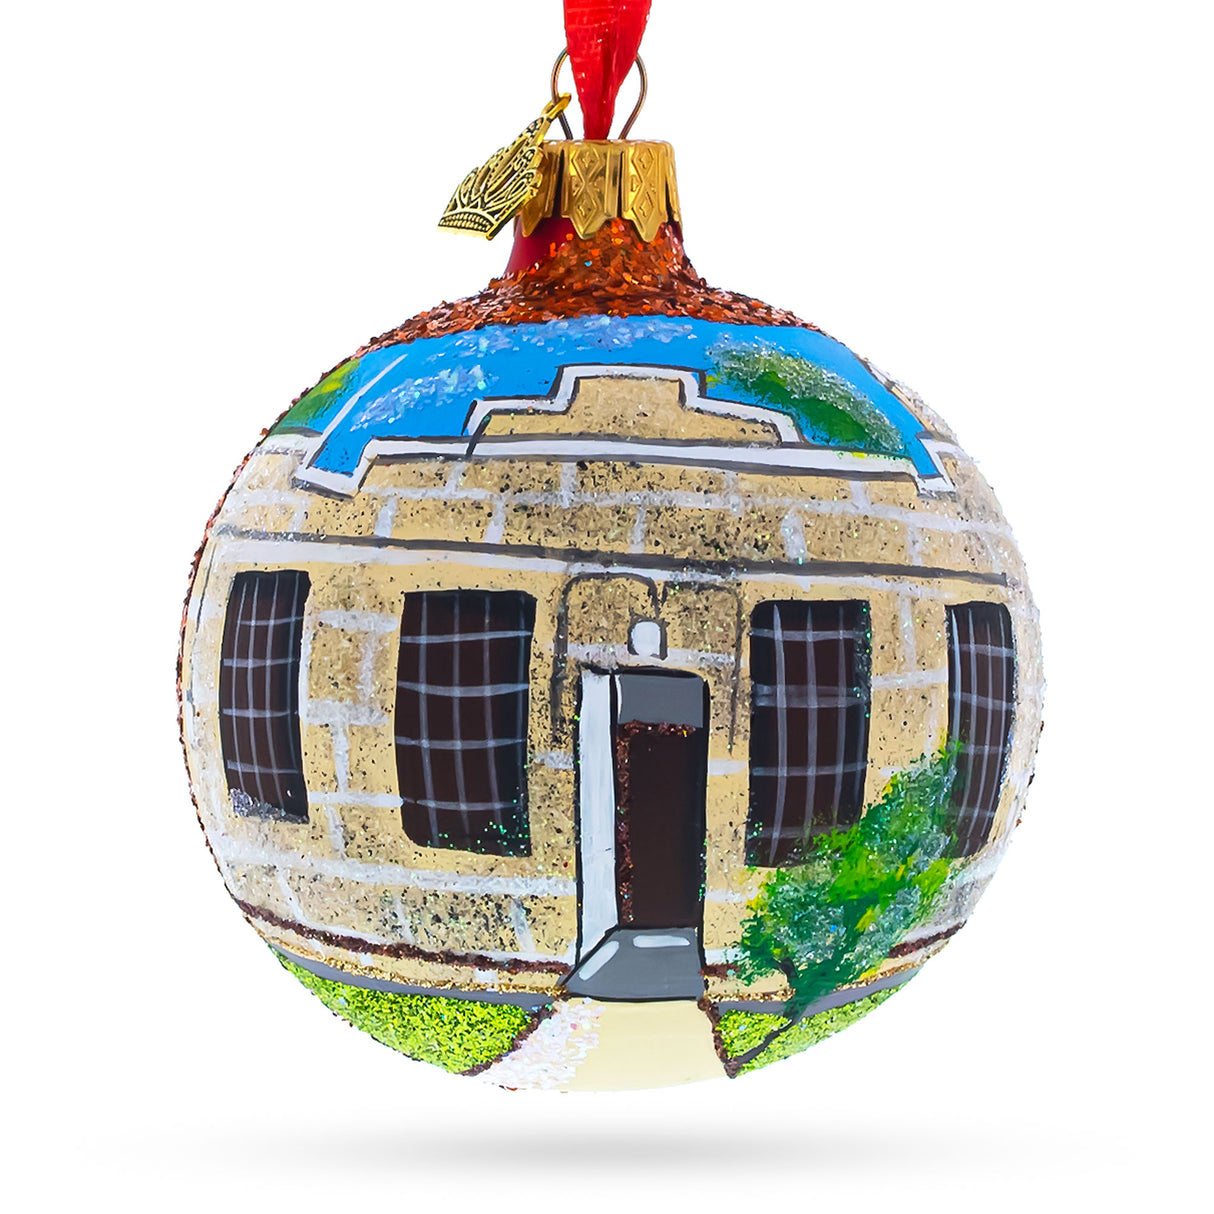 Glass Old Idaho Penitentiary, Boise, Idaho, USA Glass Ball Christmas Ornament 3.25 Inches in Multi color Round